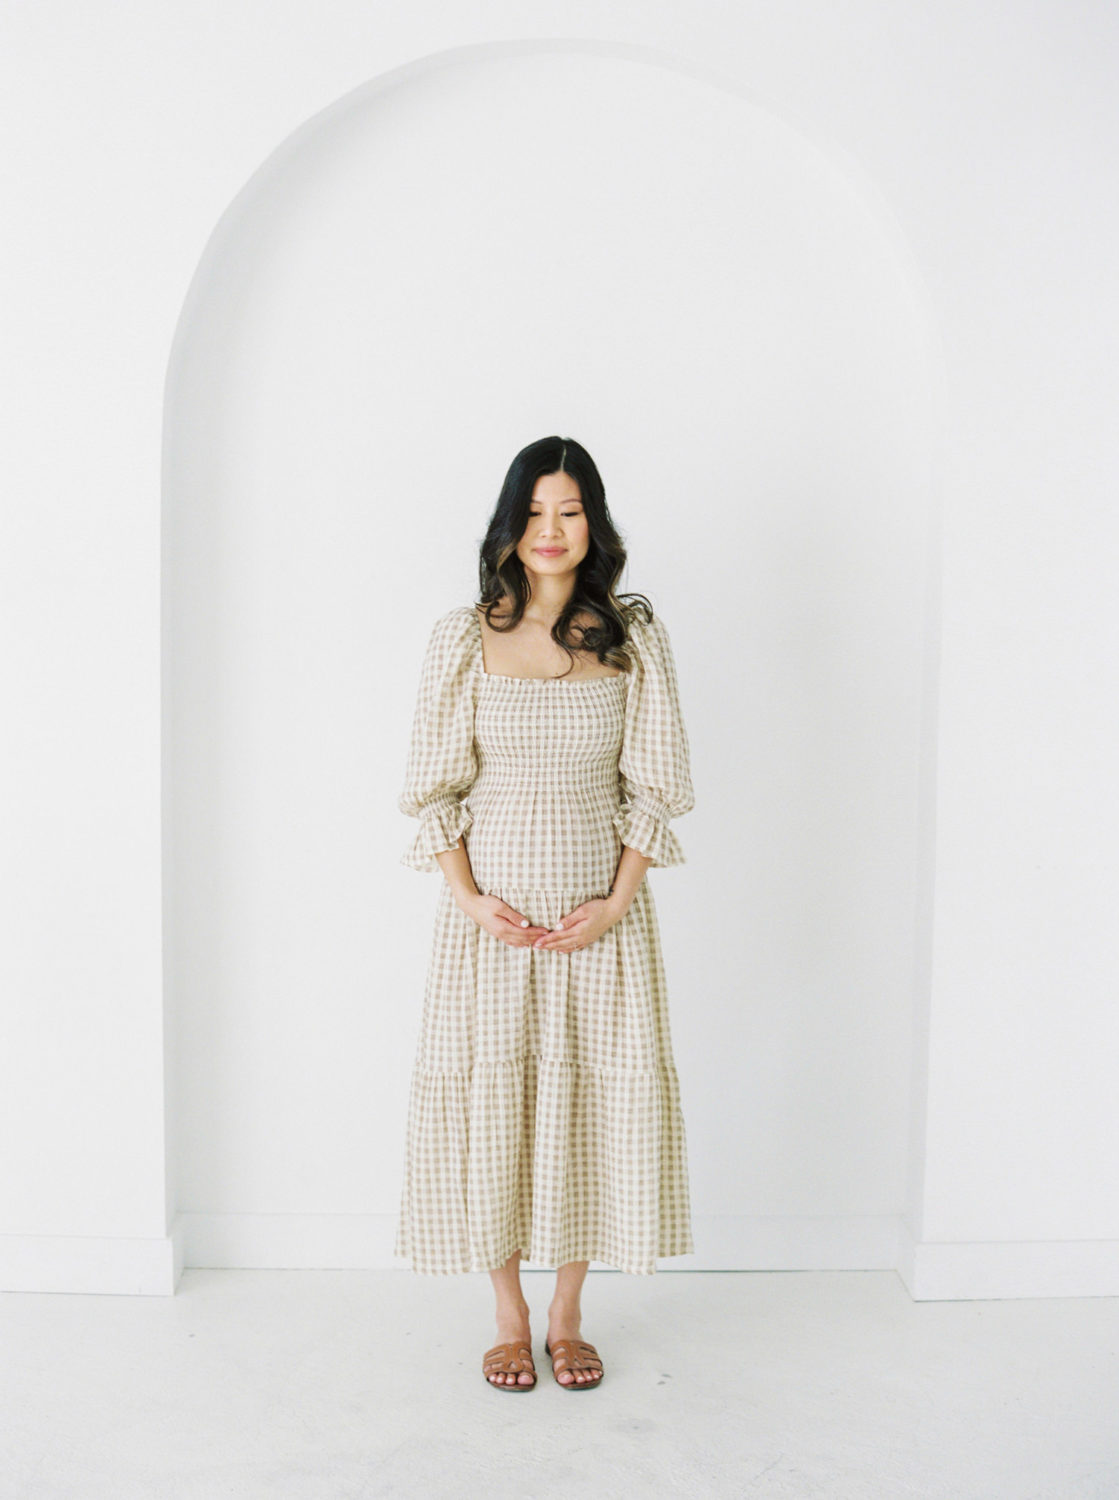 Pregnant woman in a three quarter sleeved tan and white dress and brown sandals in front of a white wall with a simple arch